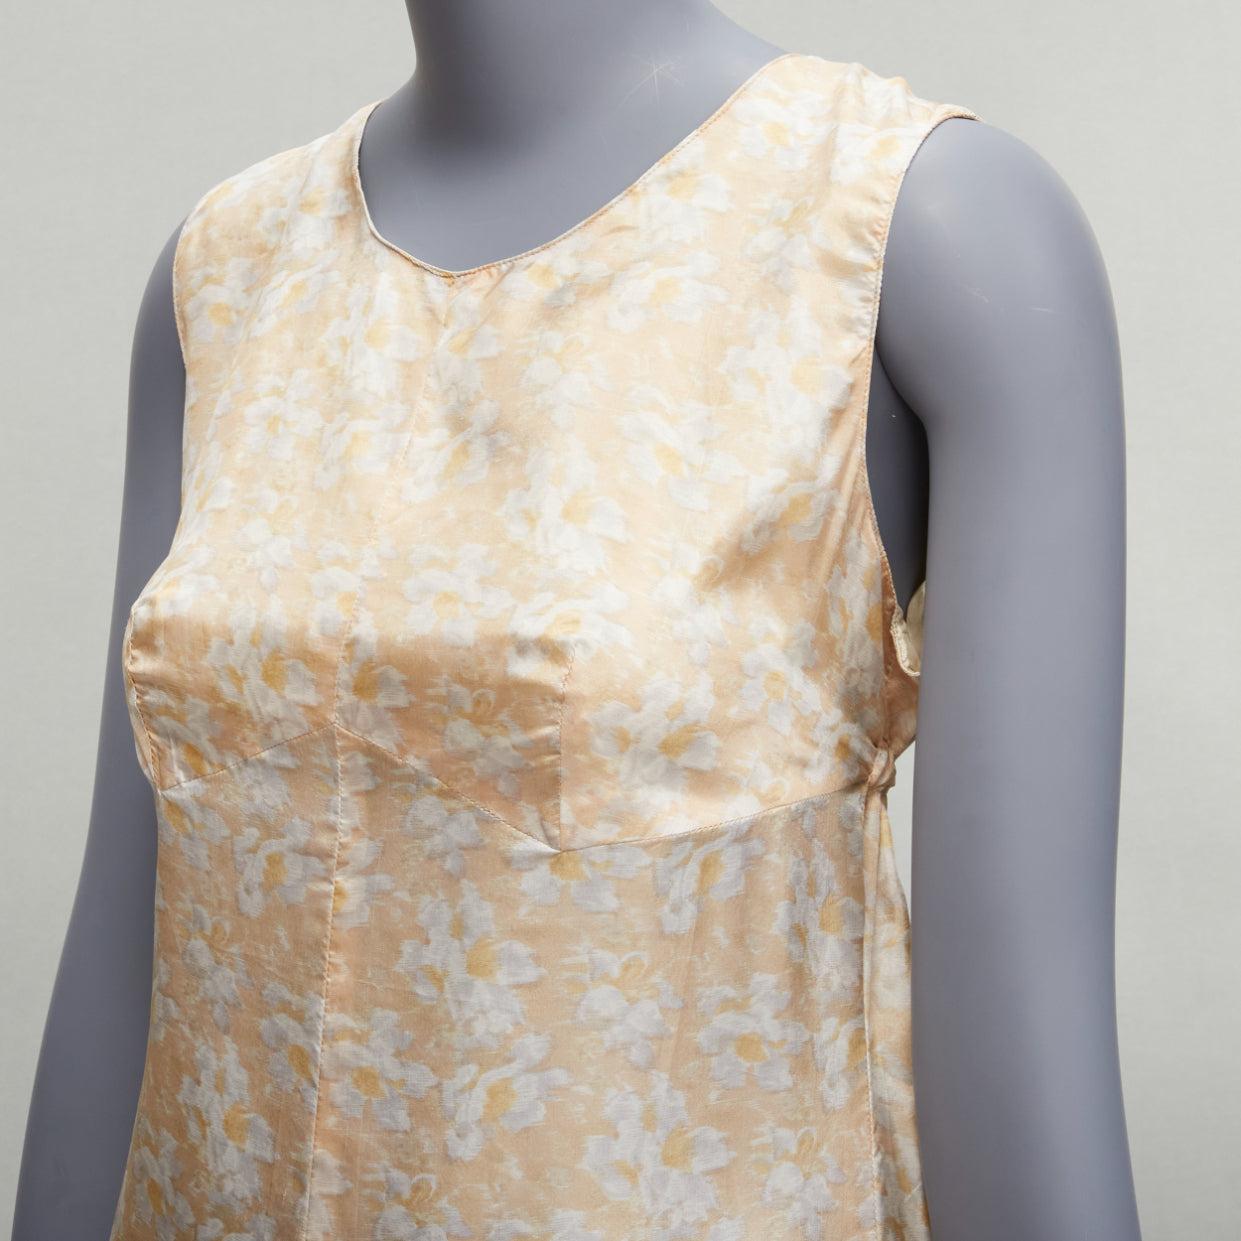 new DRIES VAN NOTEN Vintage 100% silk beige daisy print midi dress FR38 M
Reference: PYCN/A00100
Brand: Dries Van Noten
Material: Silk
Color: Beige
Pattern: Floral
Closure: Drawstring
Extra Details: Drawstring waistband adjustable.
Made in: